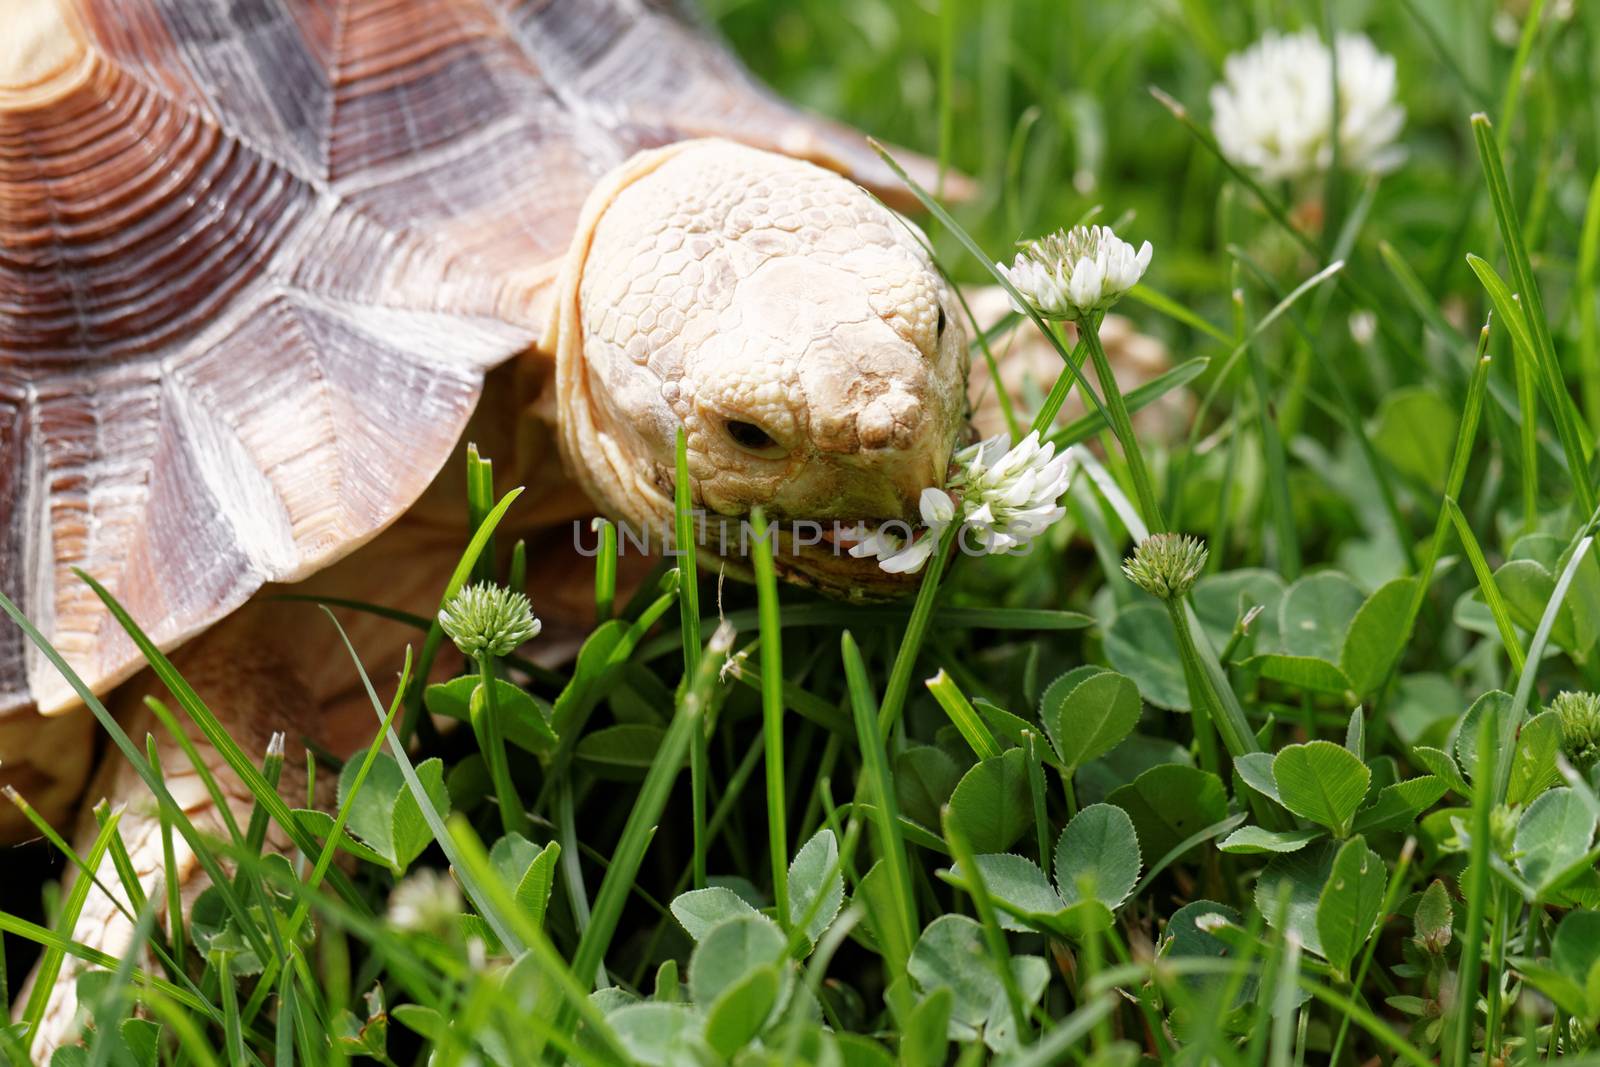 Cute turtle crawling on the green grass